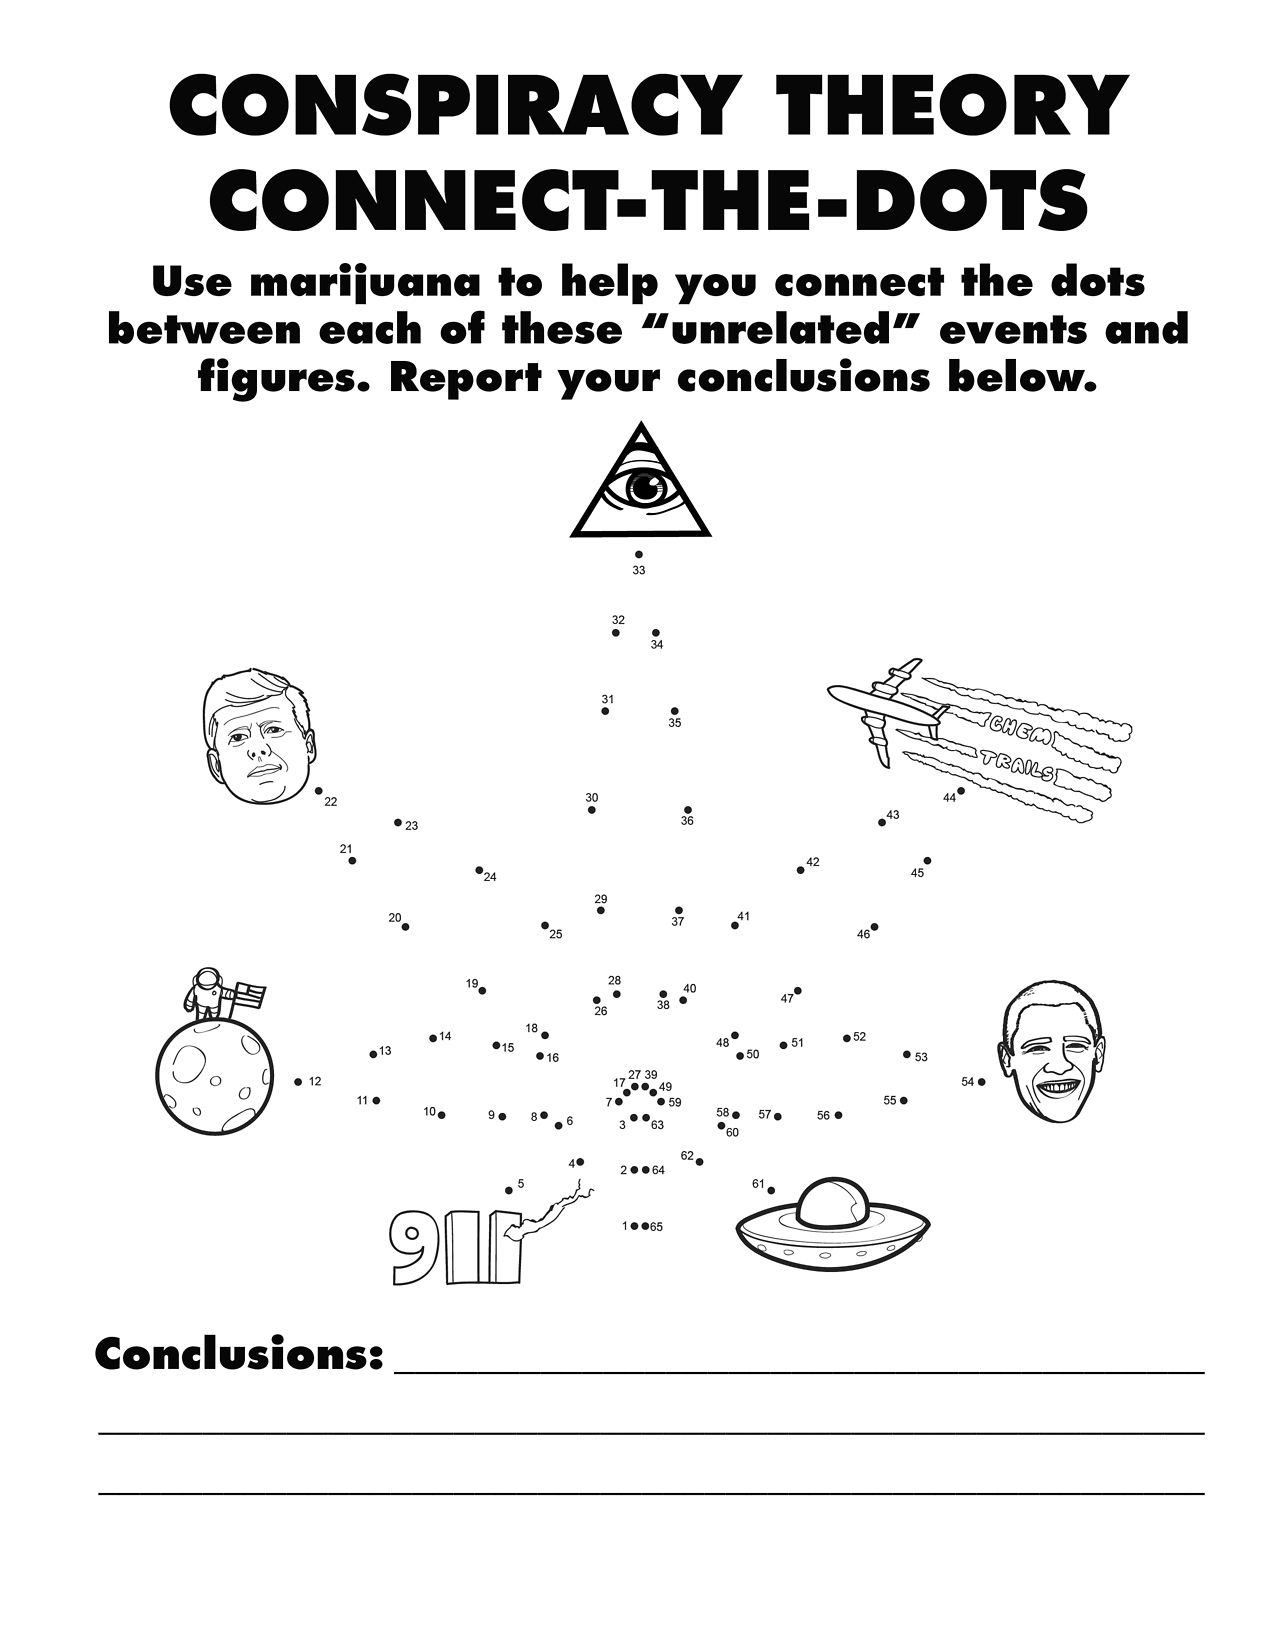 diagram - Conspiracy Theory ConnectTheDots Use marijuana to help you connect the dots between each of these "unrelated" events and figures. Report your conclusions below. Chem Trails 23 48 A8 .50 013 51 . 13 50 52 53 9 Voq 12 11 Ao 54. B . 7. 10. 59 55. 9